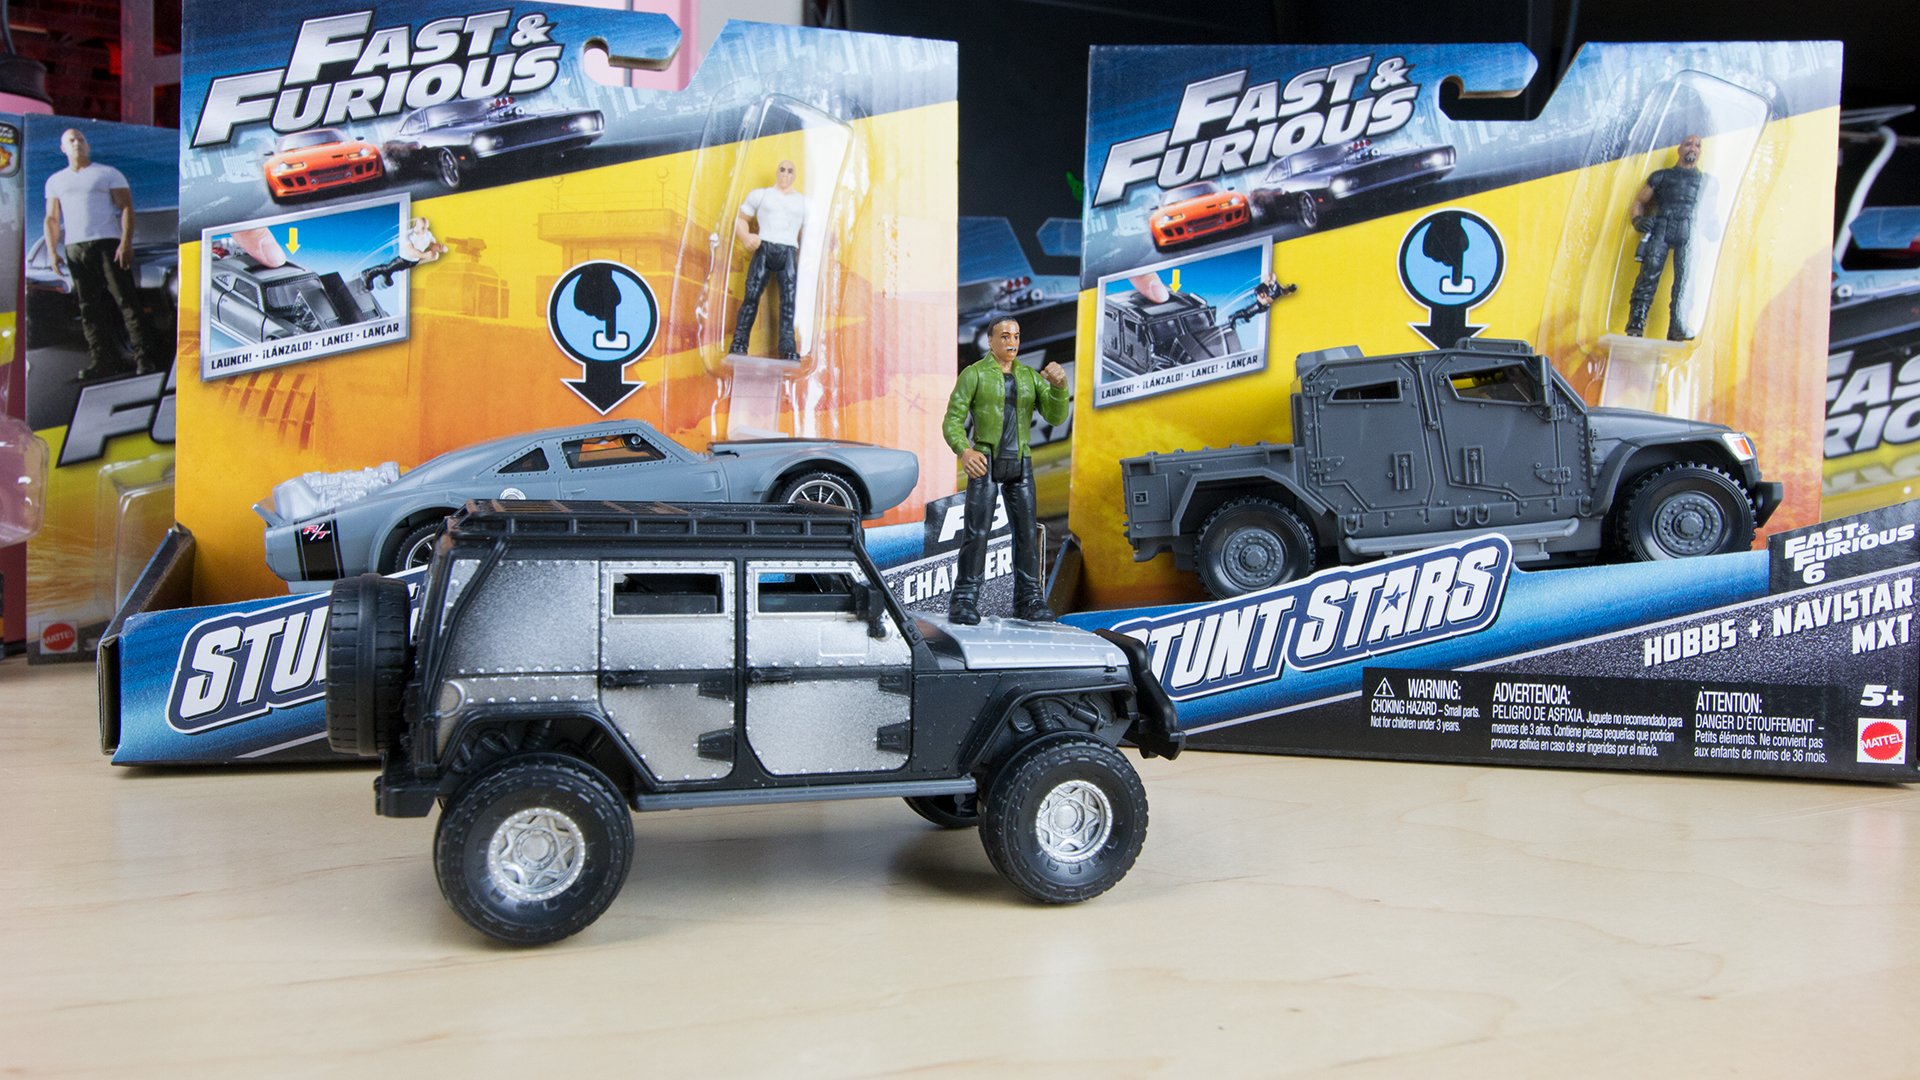 Toy Time Takes The Fate Of The Furious Into Its Own Hands